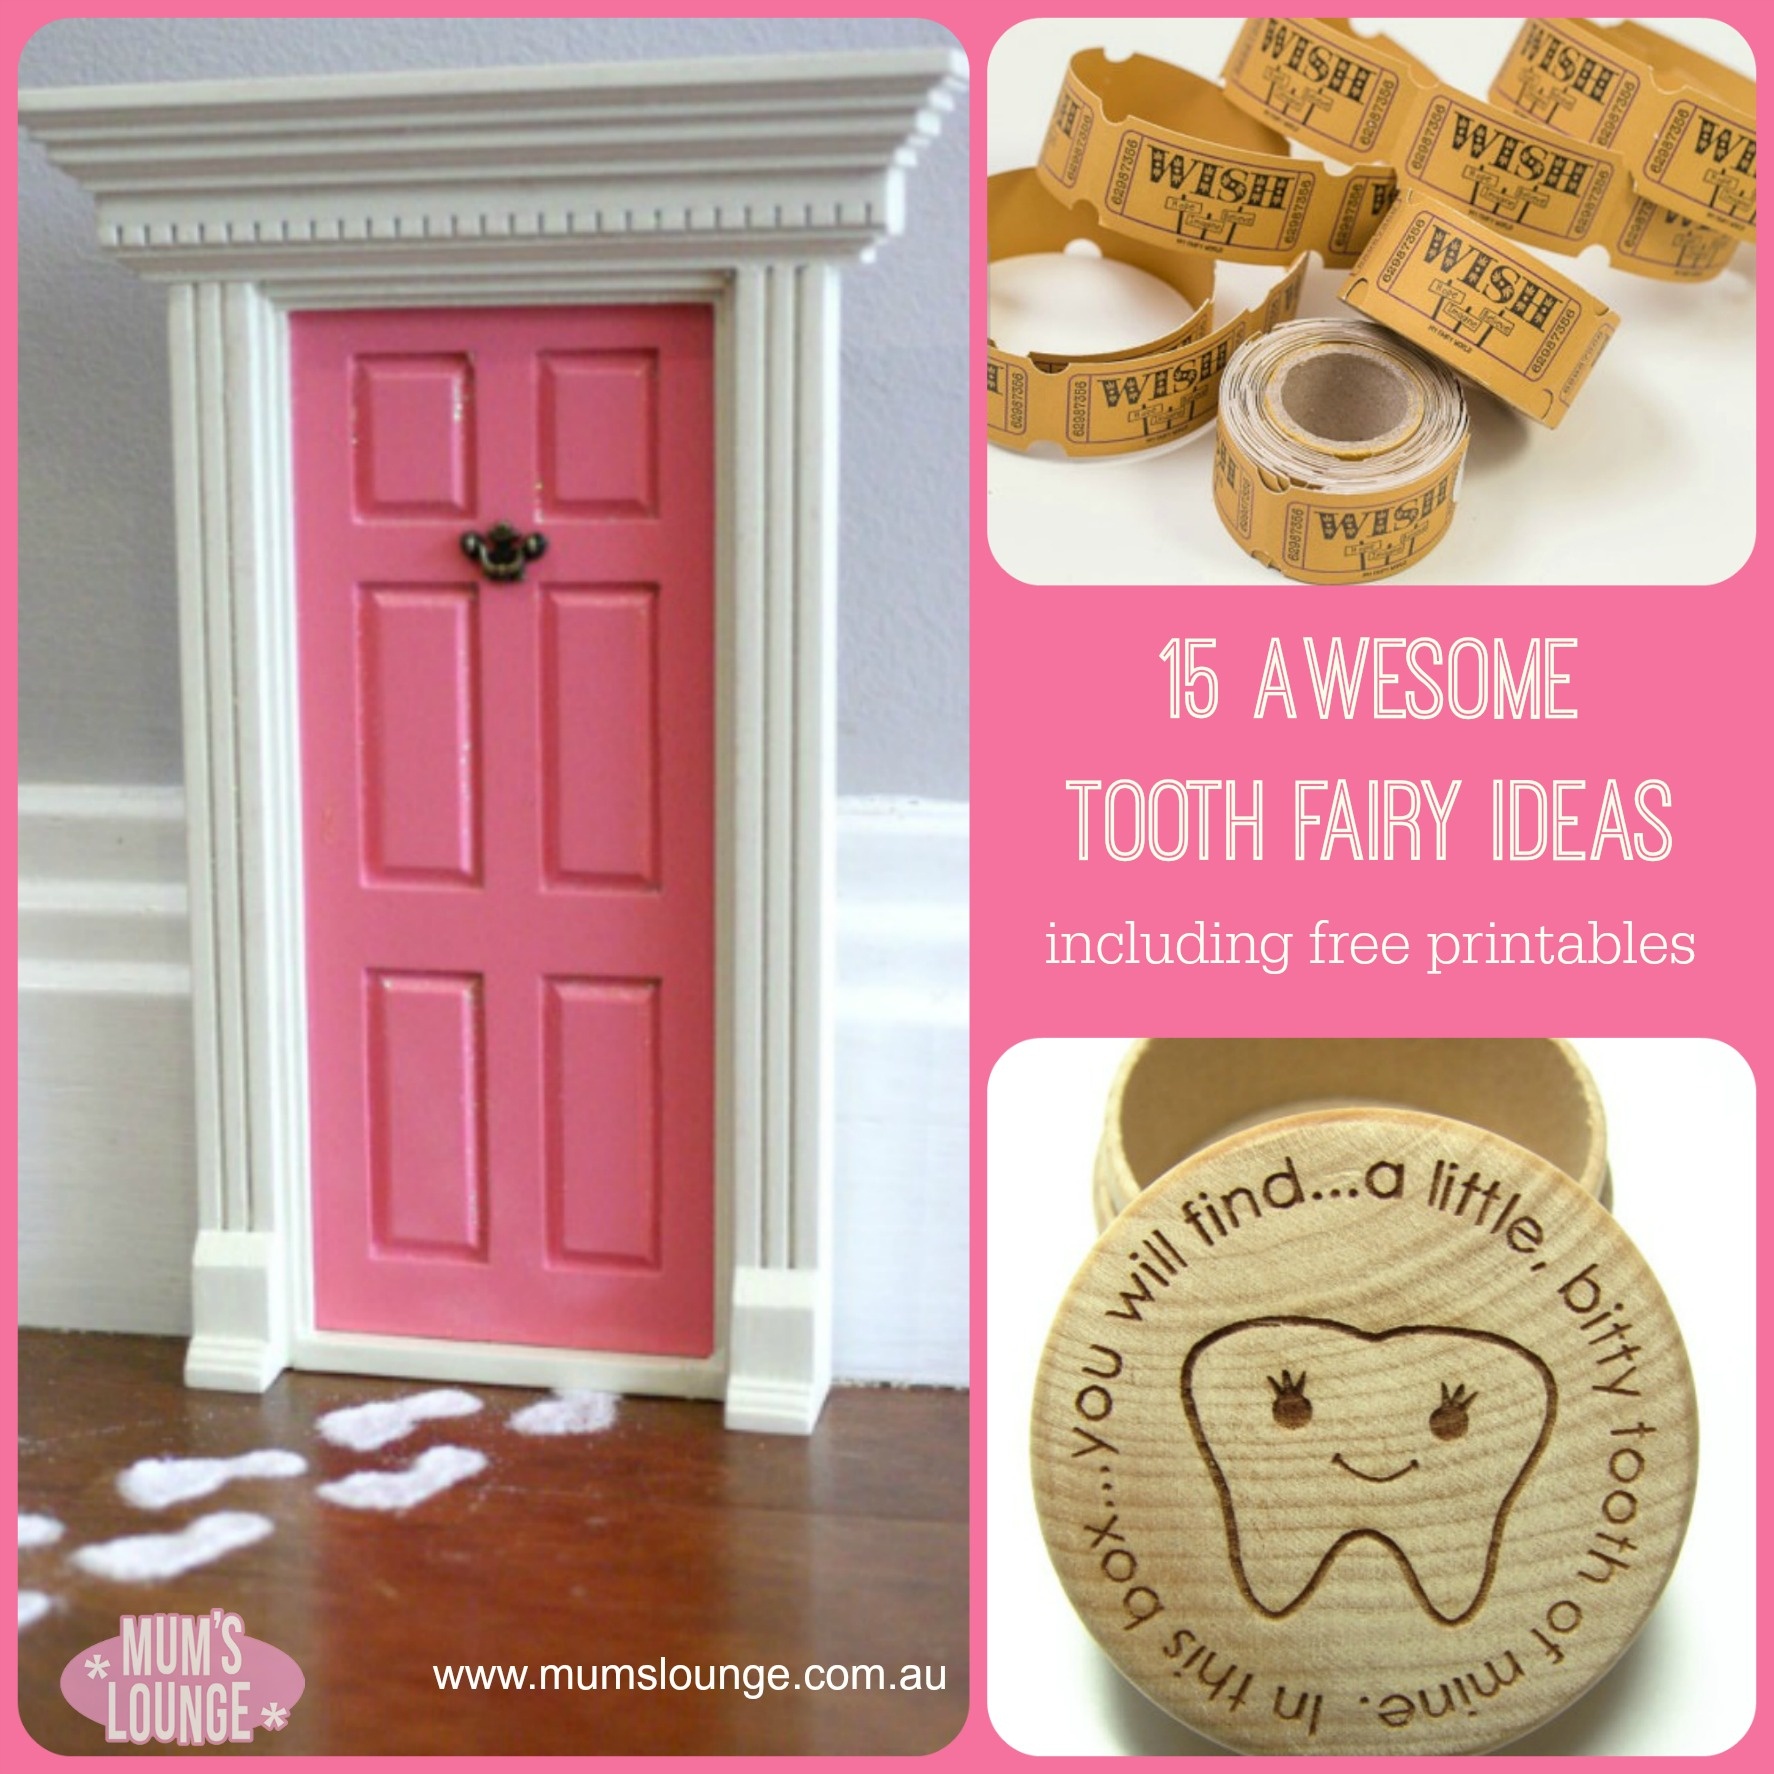 15 Awesome Tooth Fairy Ideas &amp;amp; Free Printables - Mum&amp;#039;s Lounge - Tooth Fairy Stationery Free Printable